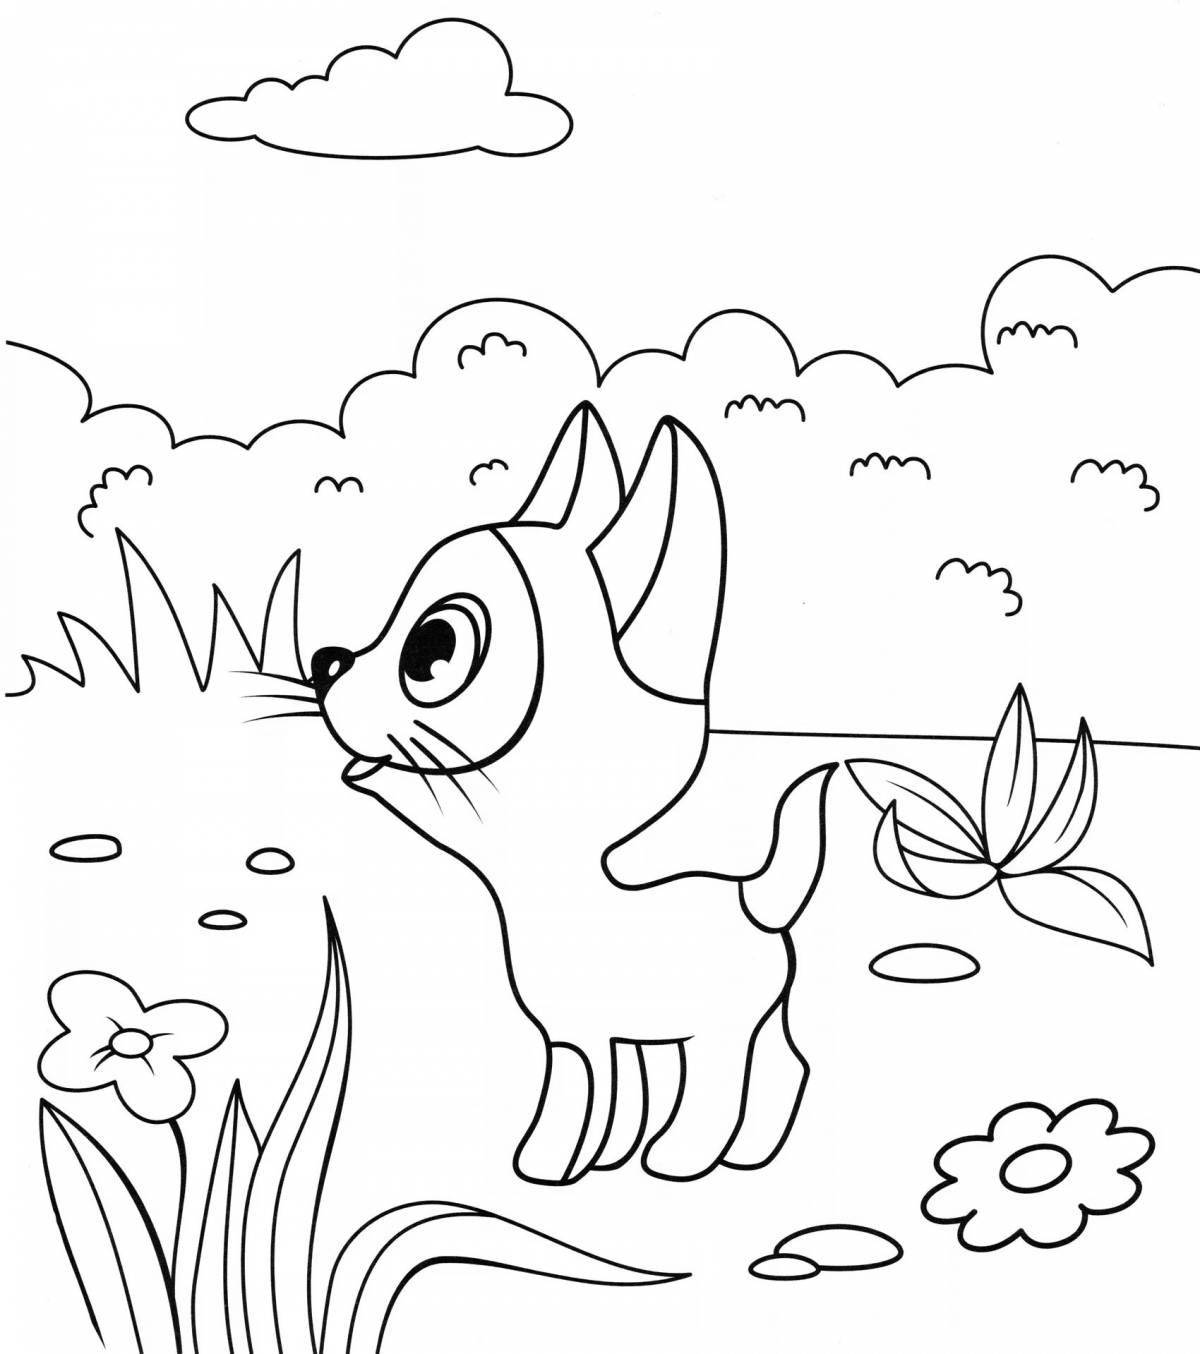 Charming woof coloring book